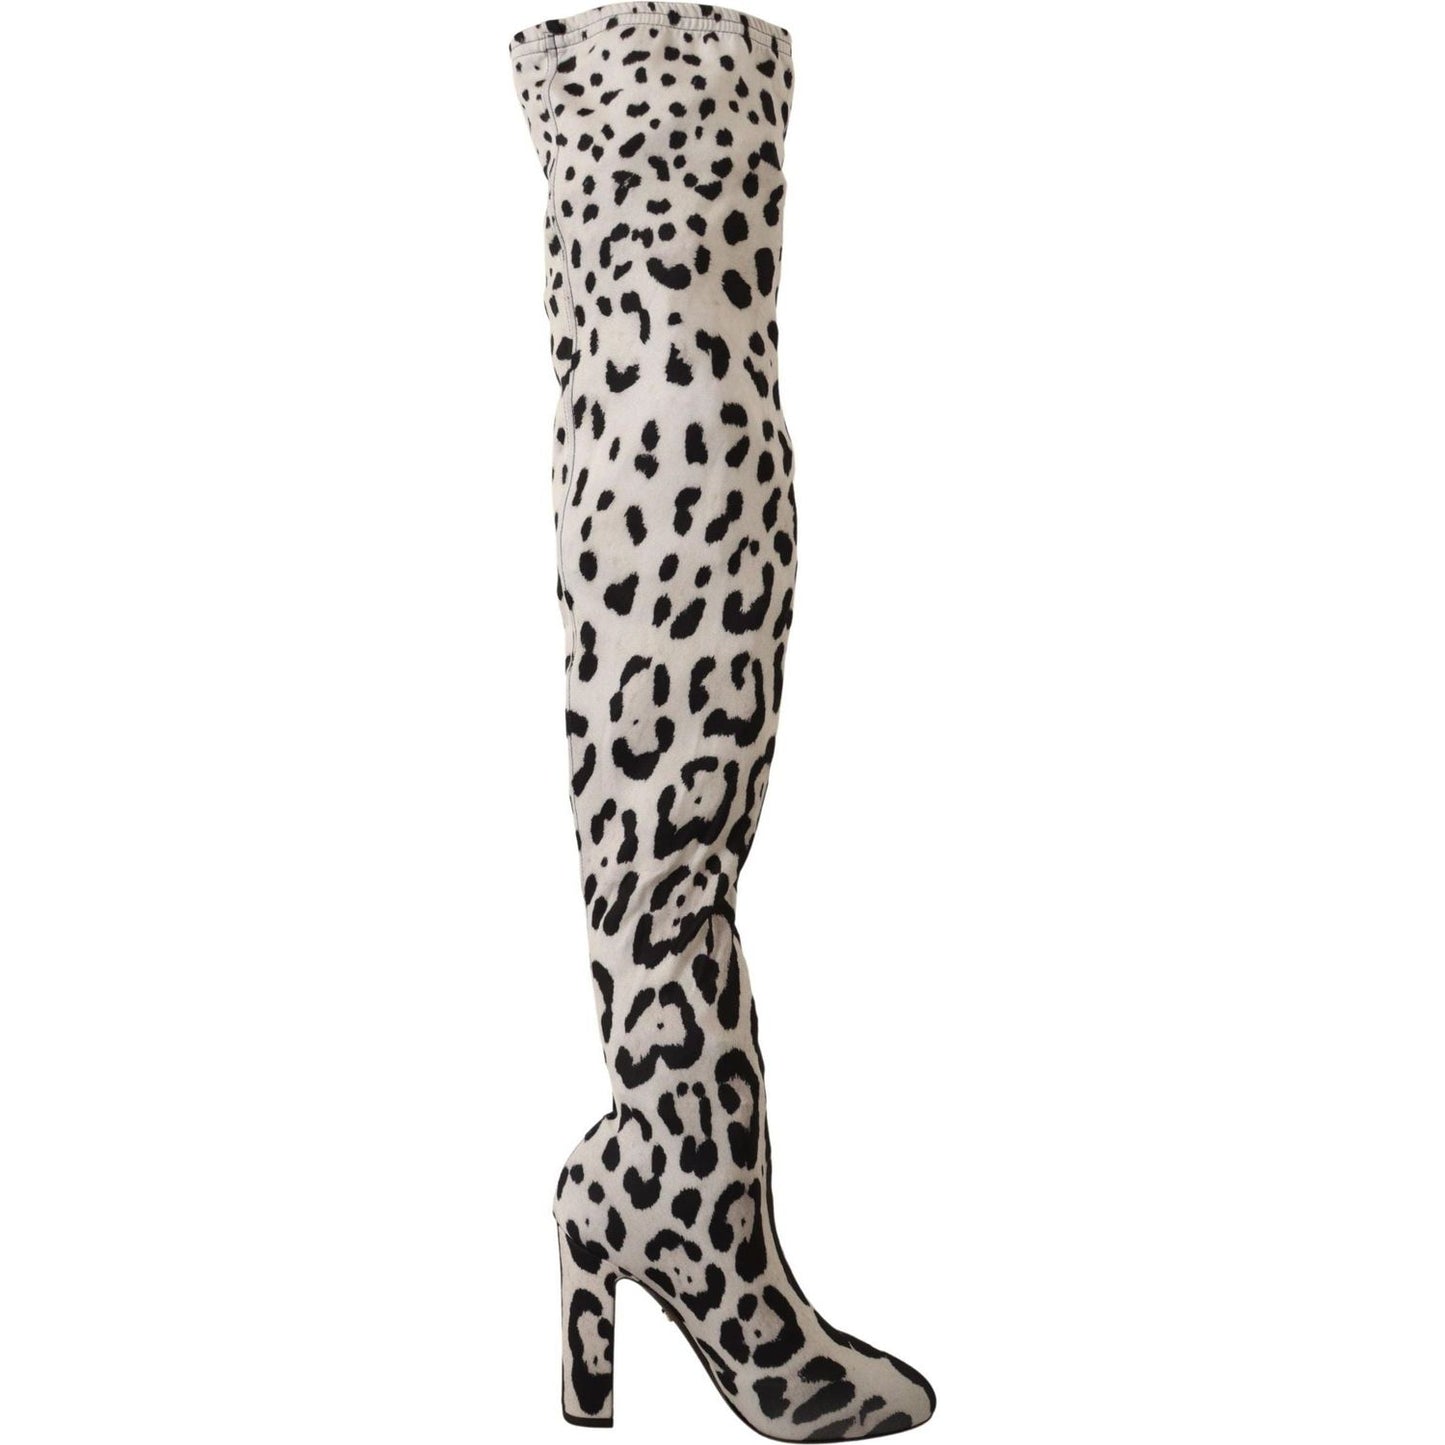 Dolce & Gabbana Chic Leopard High-Heel Over-Knee Boots white-black-leopard-stretch-long-boots IMG_5962-scaled-084201ca-48c.jpg